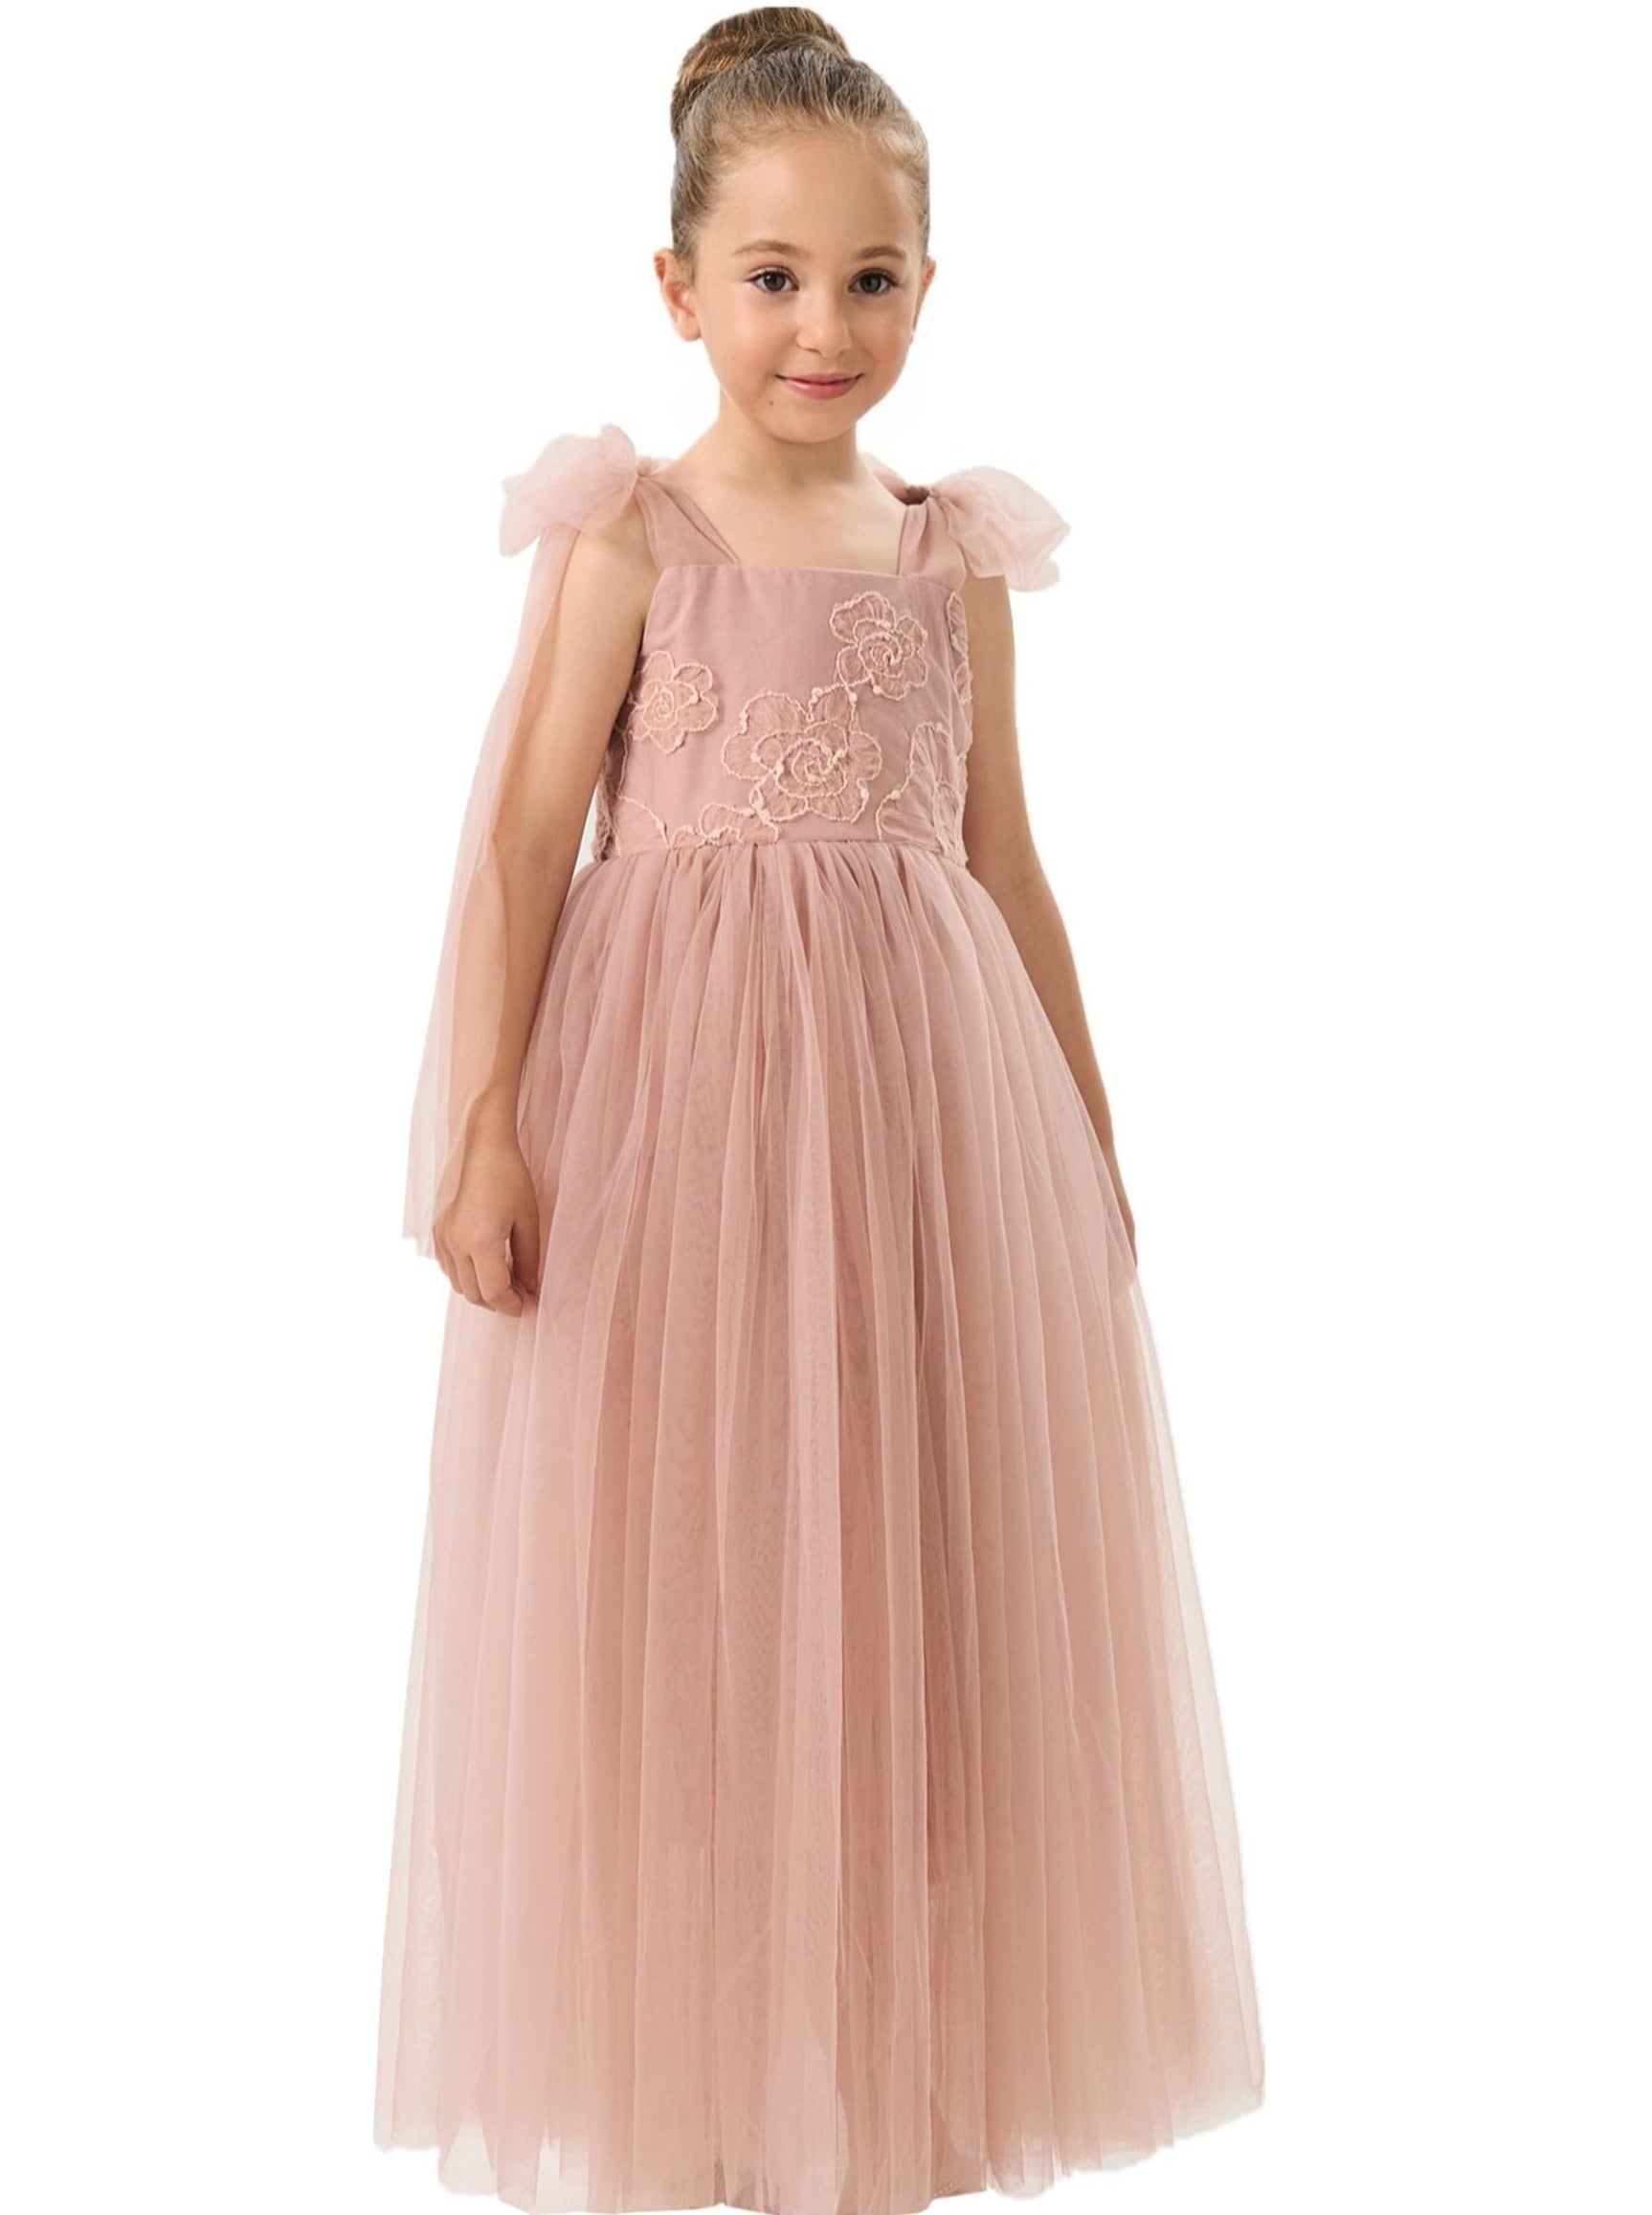 Lily Adjustable Strap Girl Dress in Dusty Pink